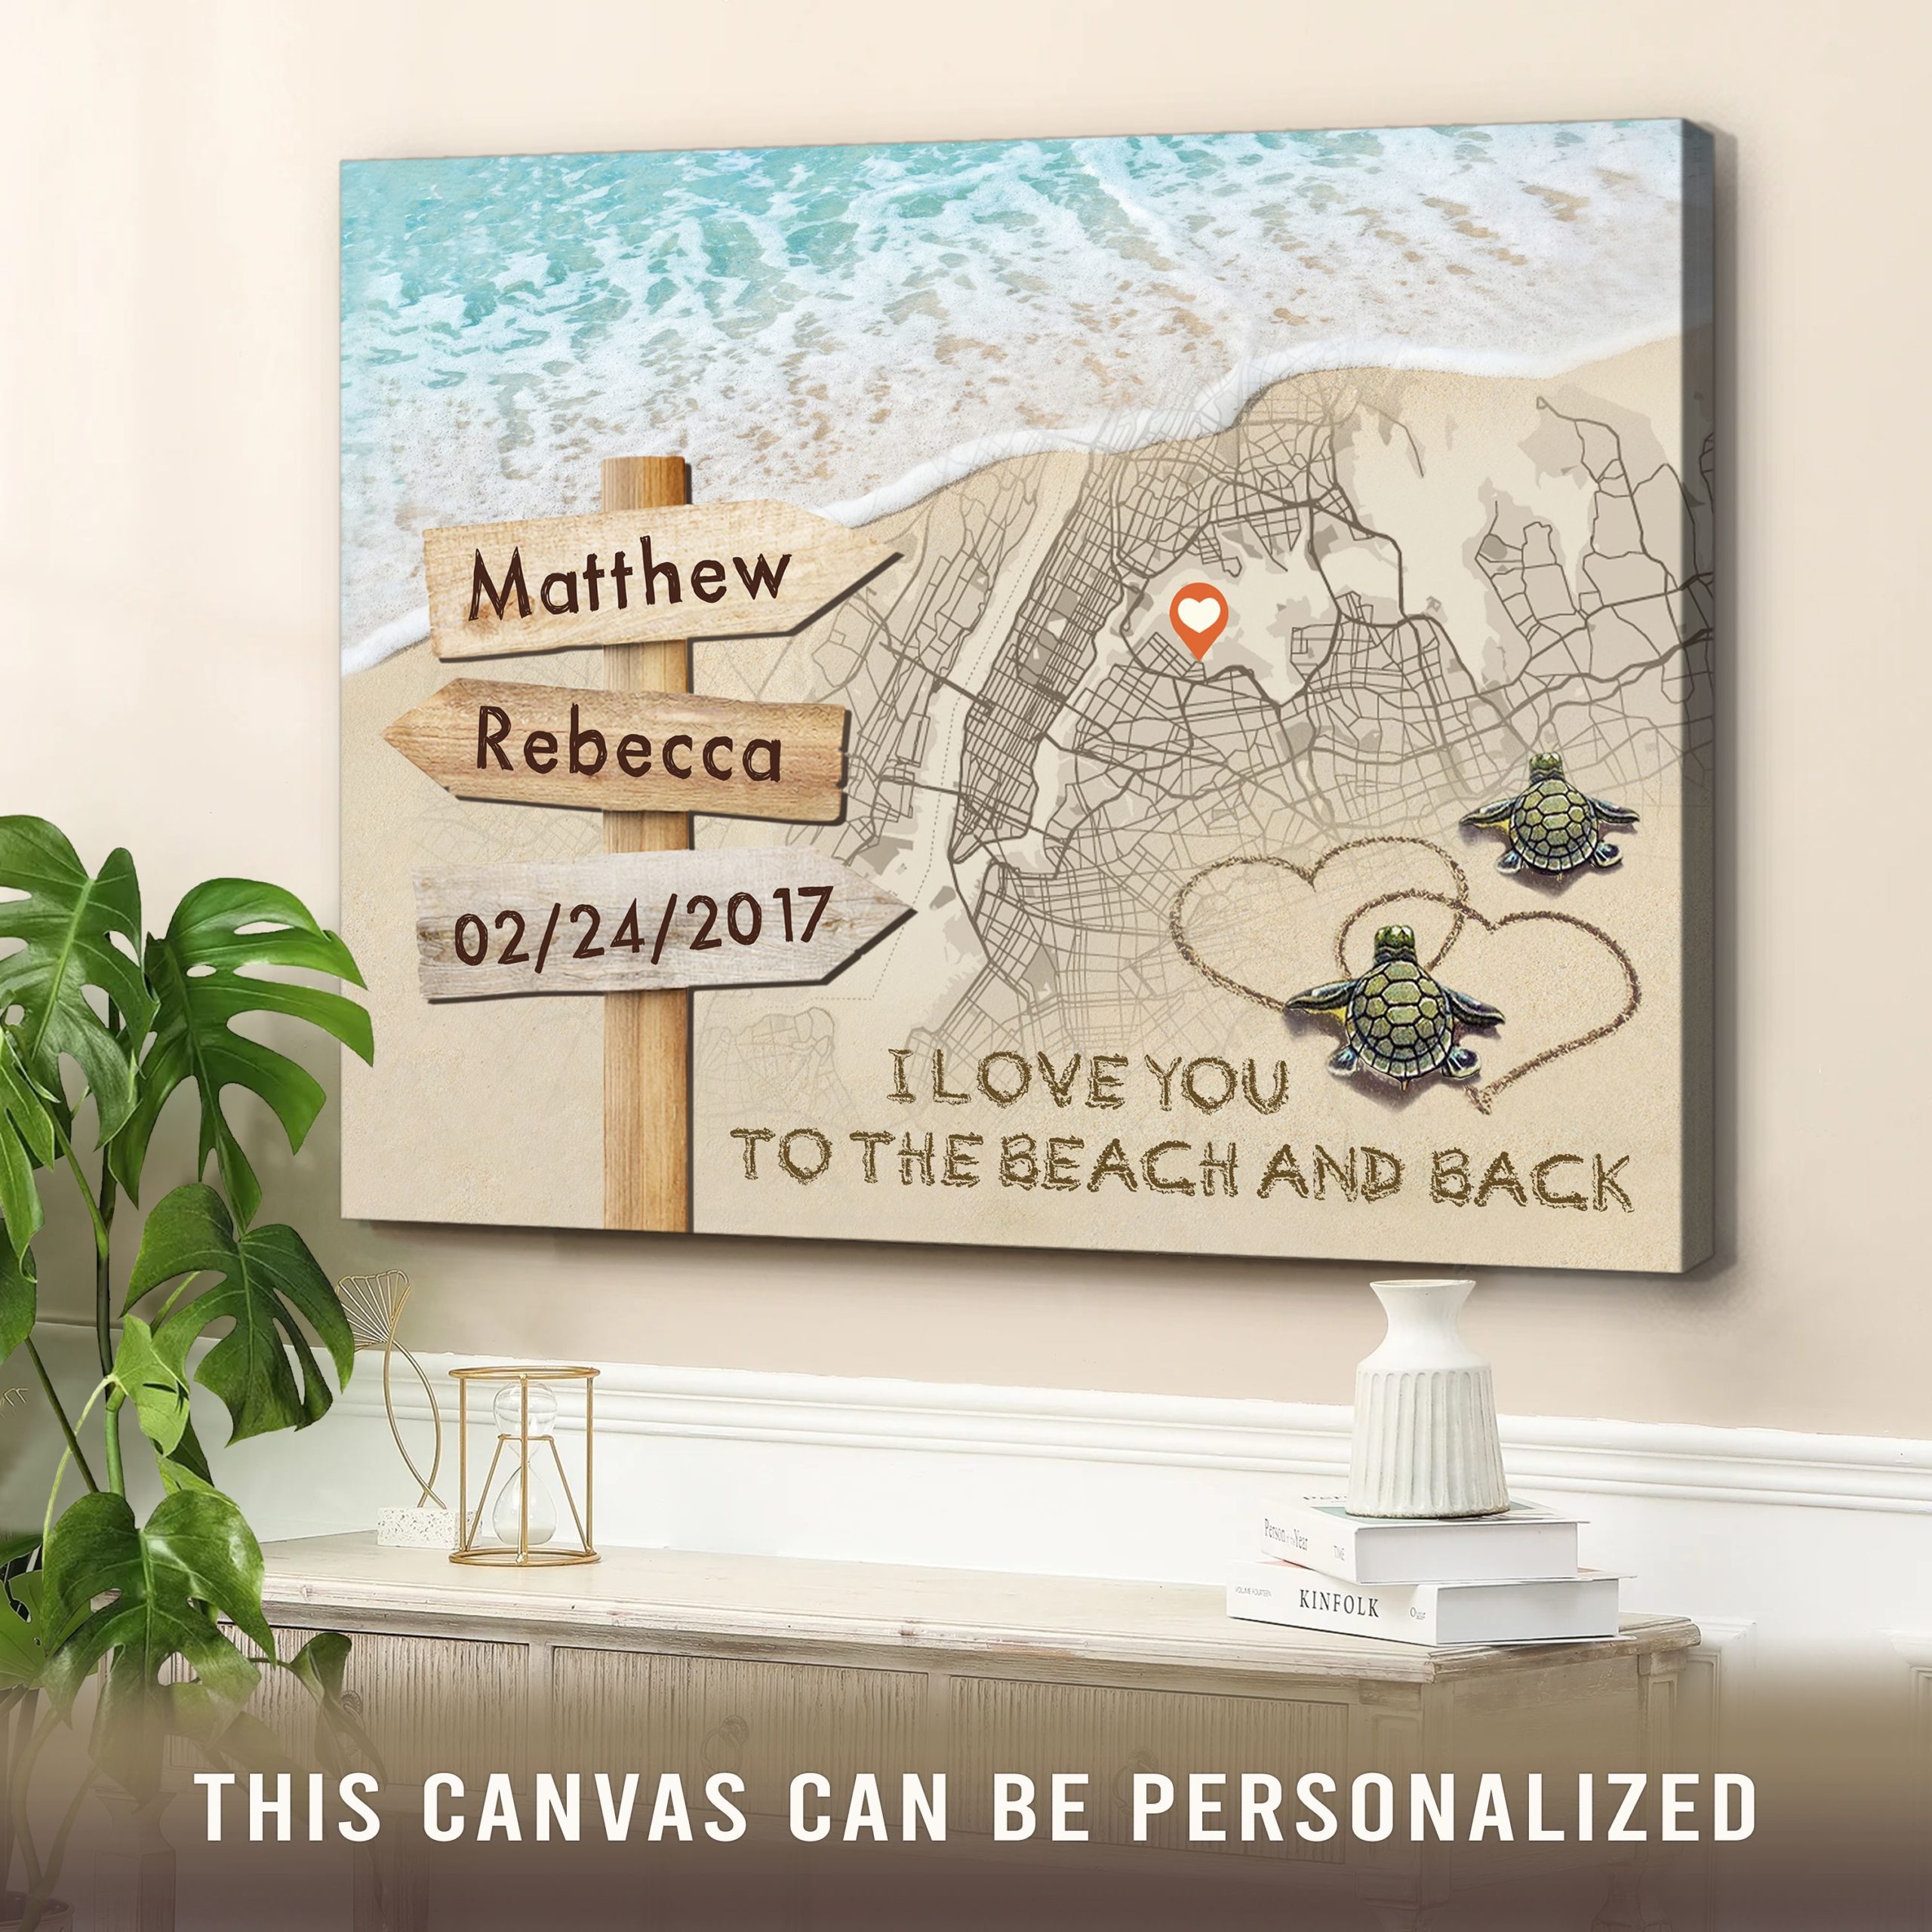 Personalized Our First Date Gift With Photo, 1st Anniversary Gift Ideas,  Present Map Location Canvas